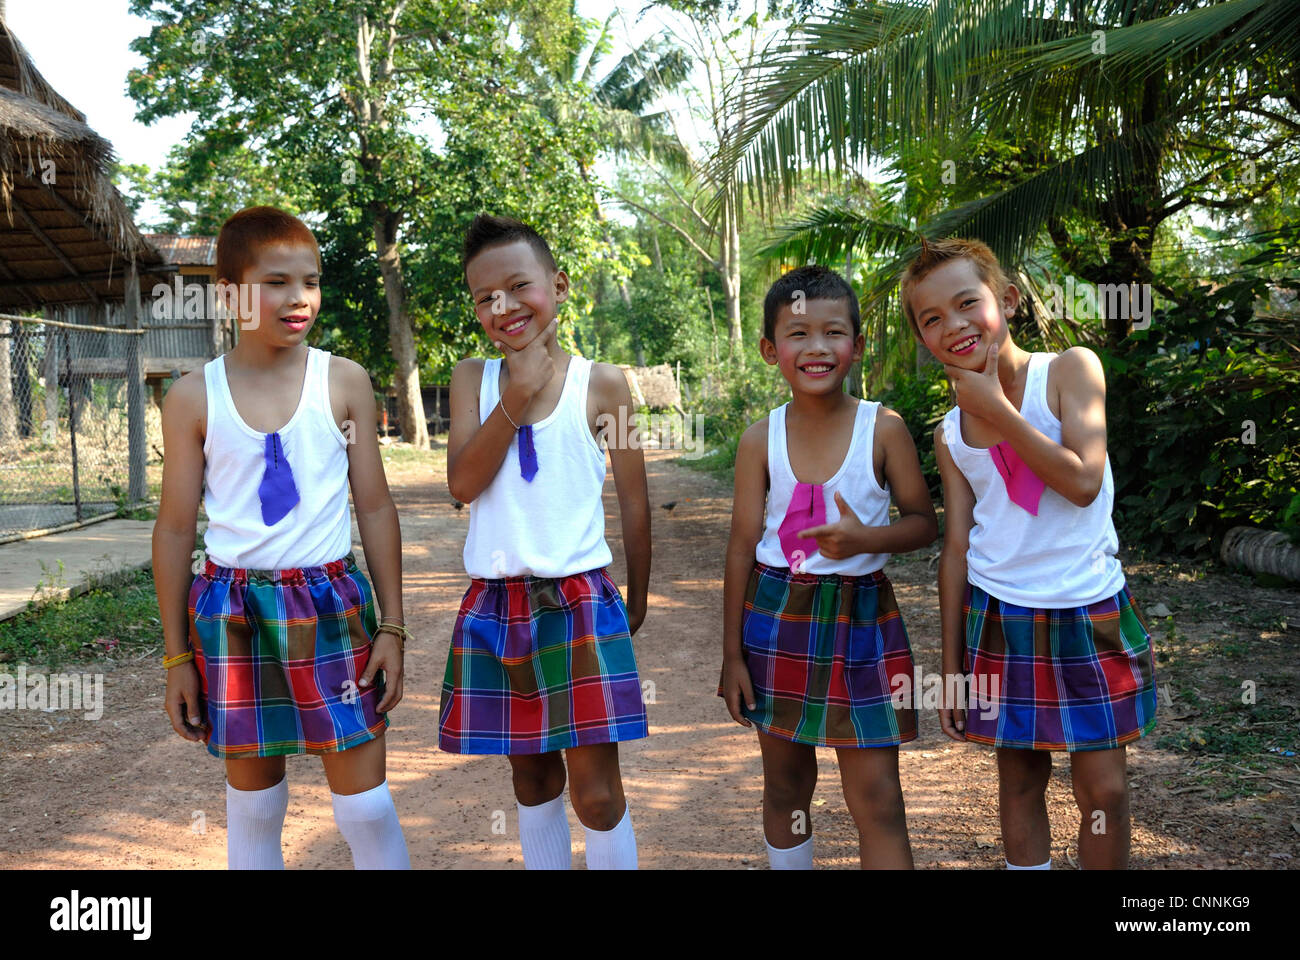 young boys dressed as girls in issan costume for songkhran festival Stock Photo